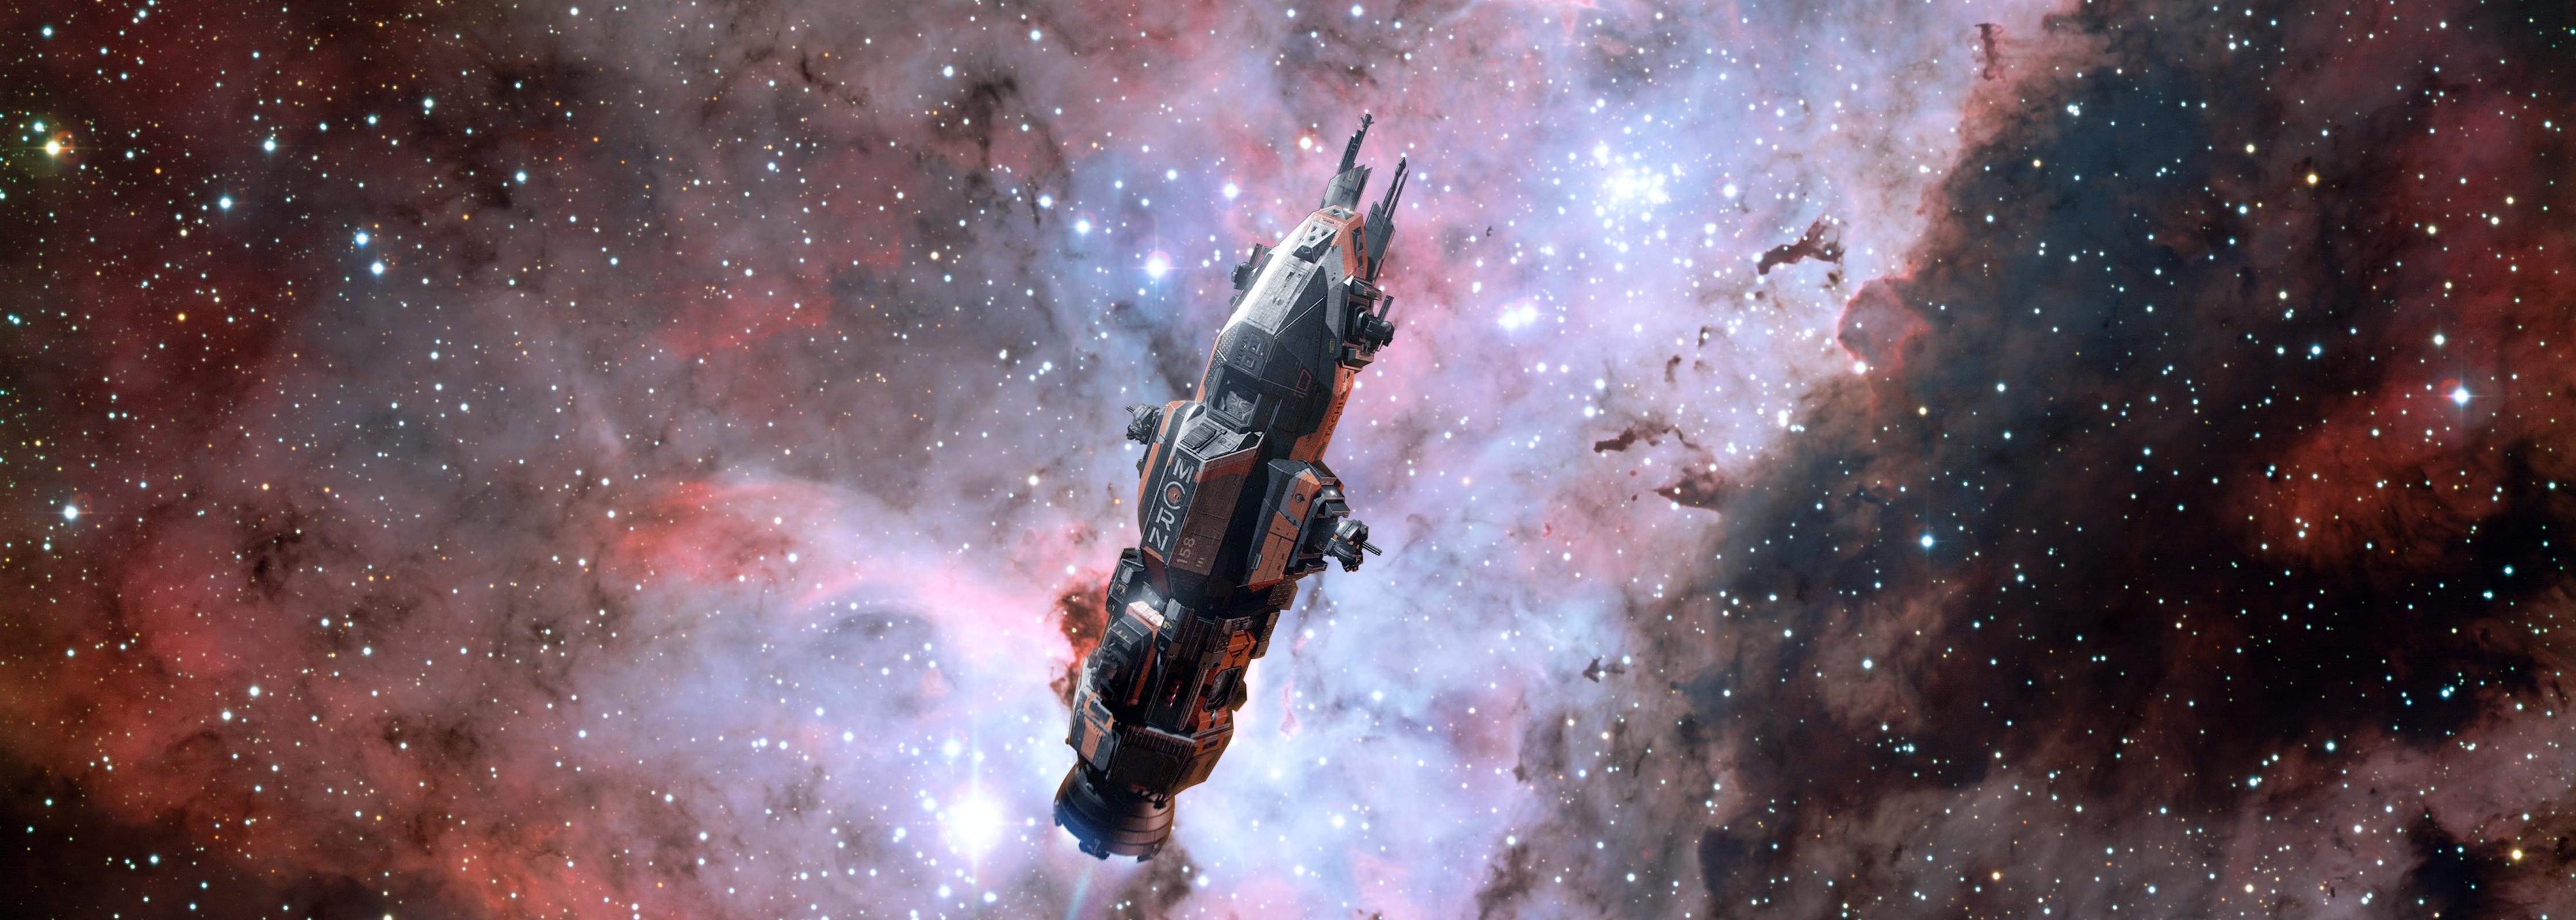 The Expanse Space Science Fiction Tv Series TV Spaceship Rocinante 4480x1600